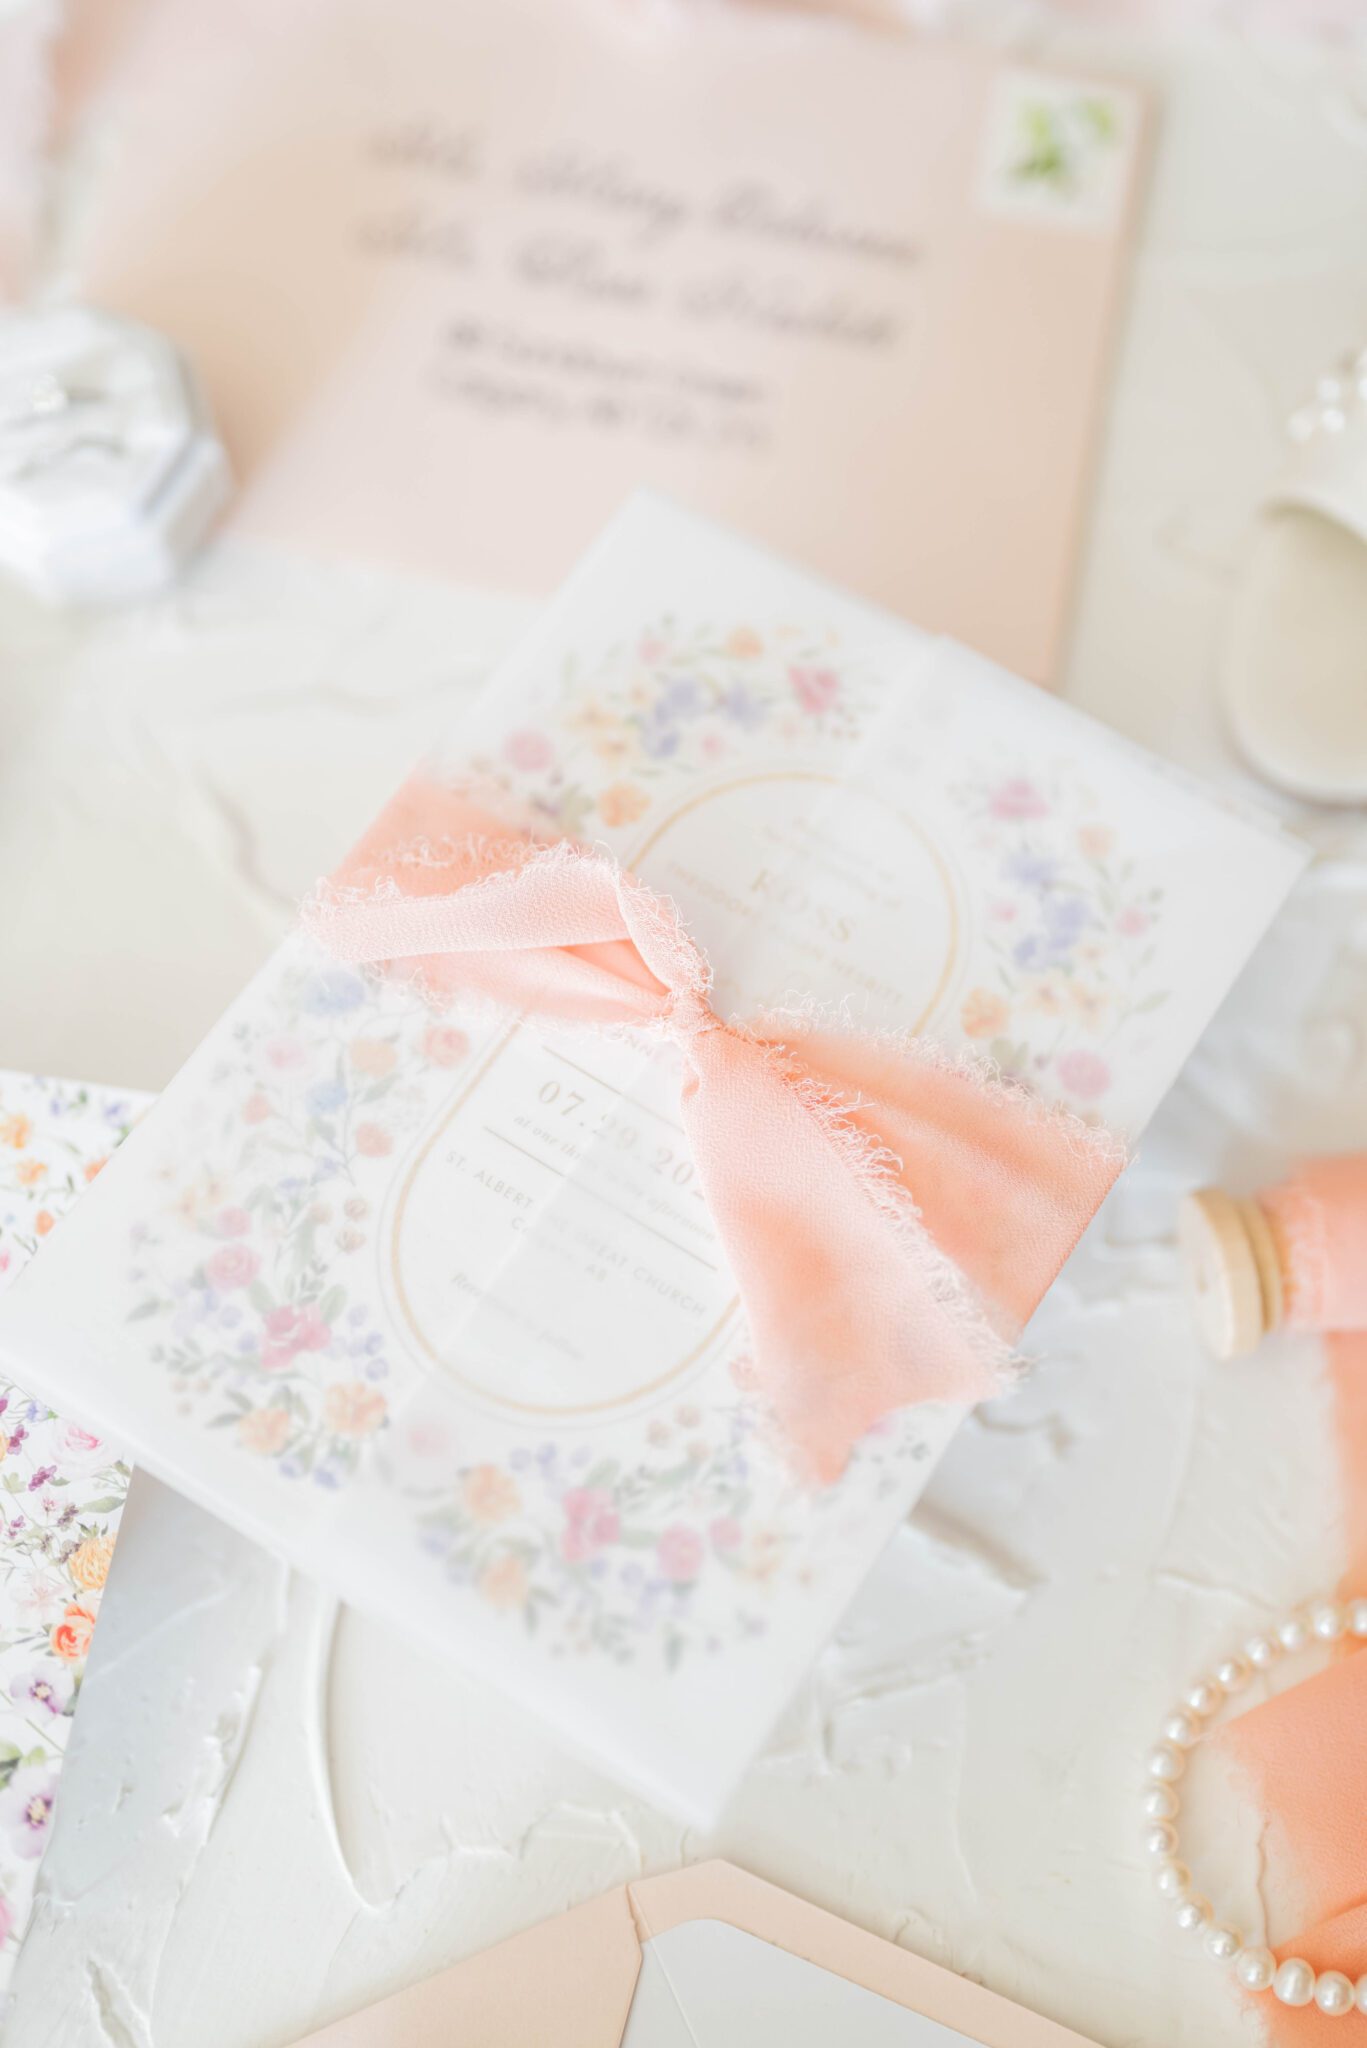 Floral-printed custom wedding stationery, flatlay photos inspiration, with light peach ribbon and accent colour.